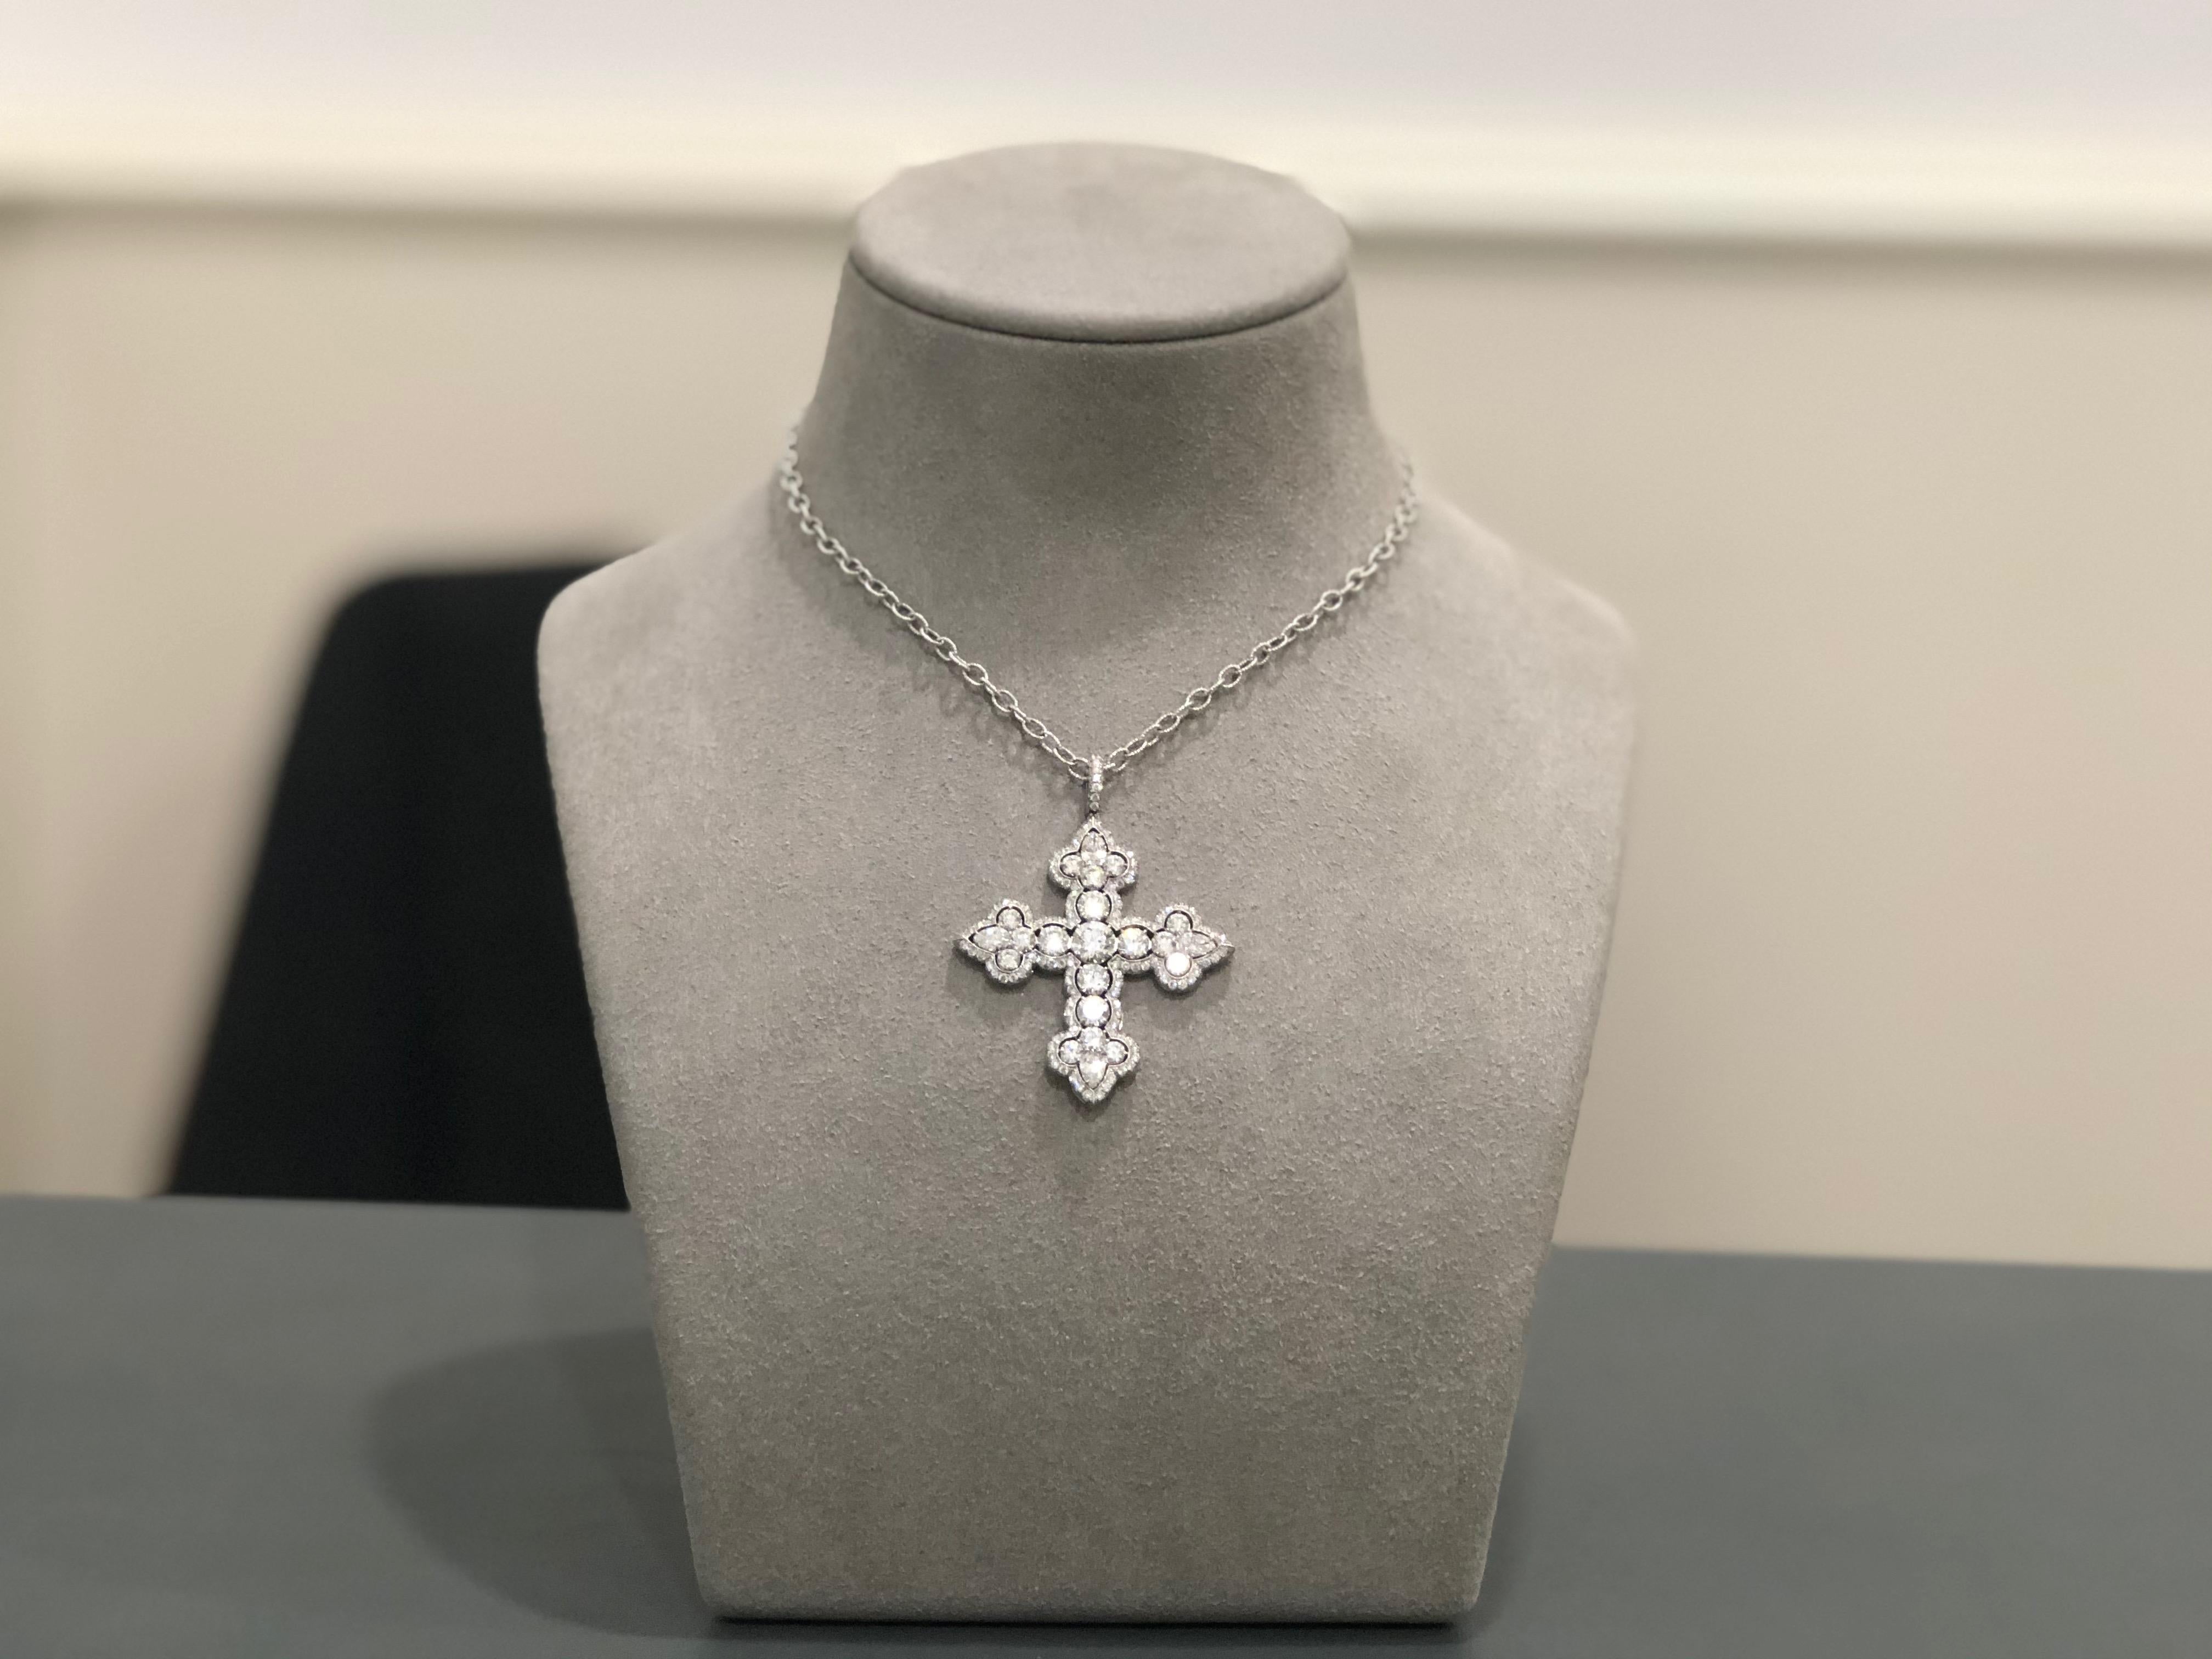 Cross pendant set with 6.39 carats of brilliant white diamonds. Each corner of the cross is set with a pear shape diamond. Comes with a 17.5 inch ribbed chain link necklace. Set in platinum.